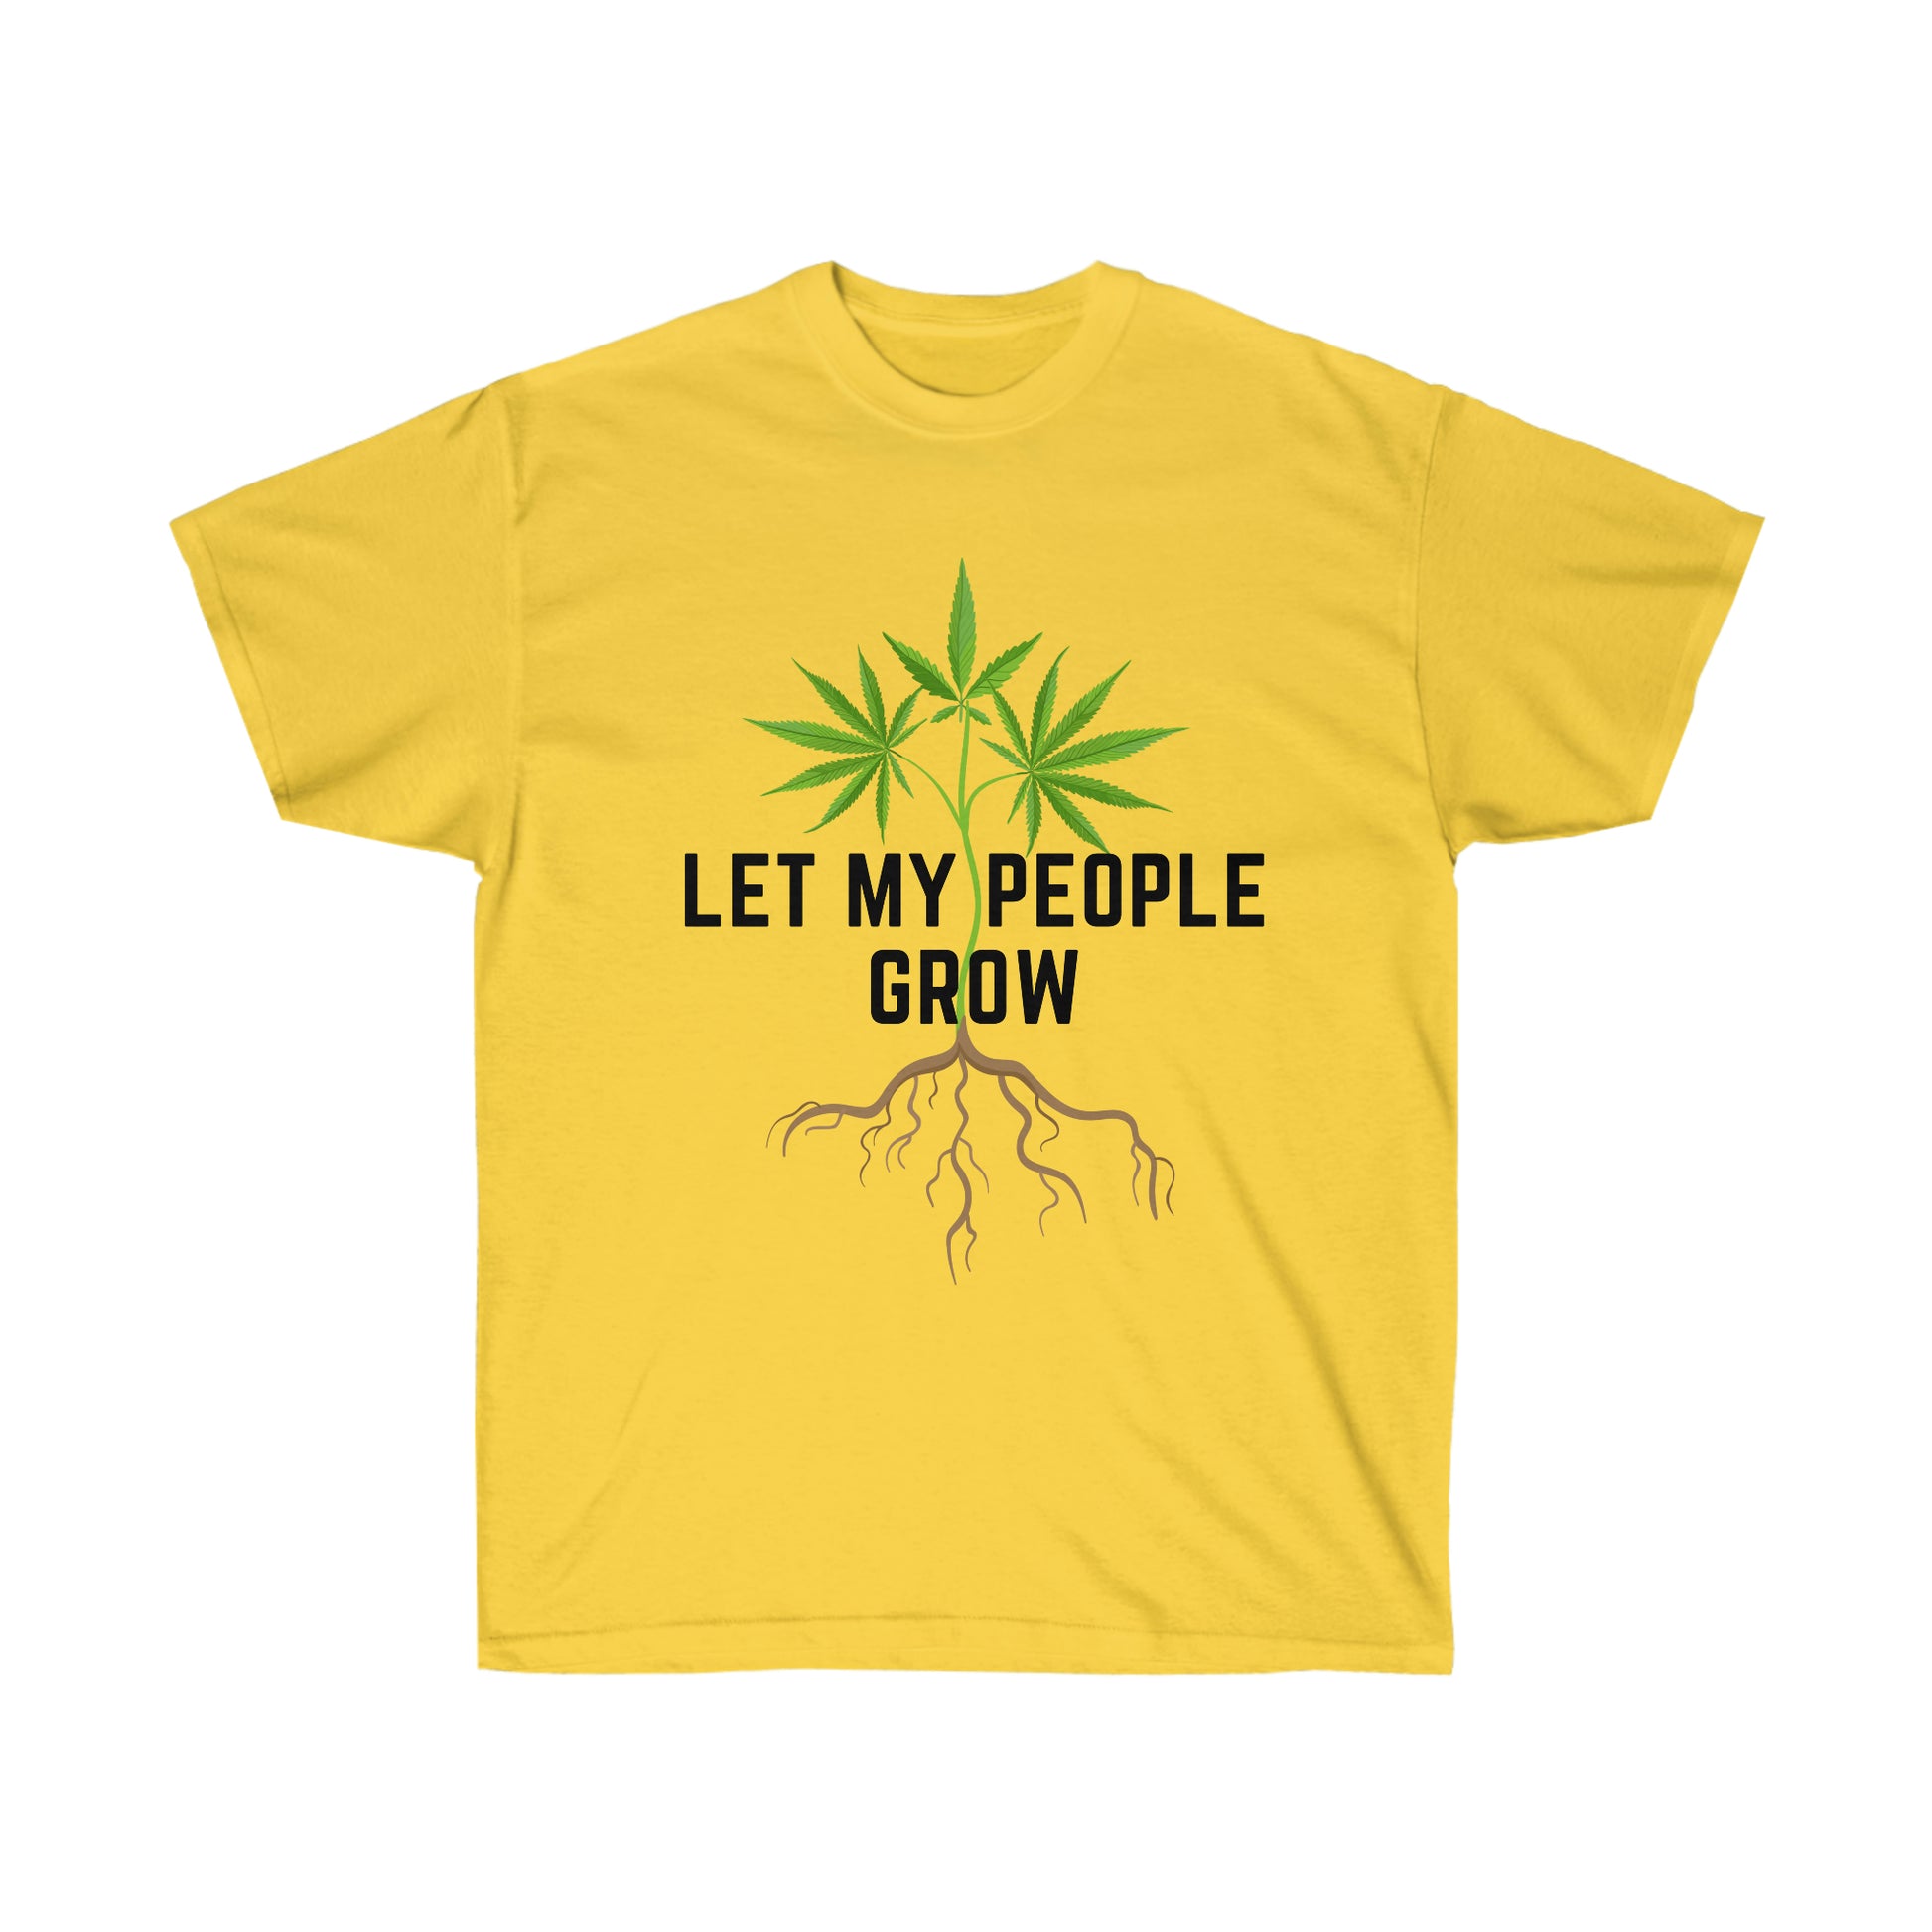 Let the "Let My People Grow T-Shirt" t-shirt.